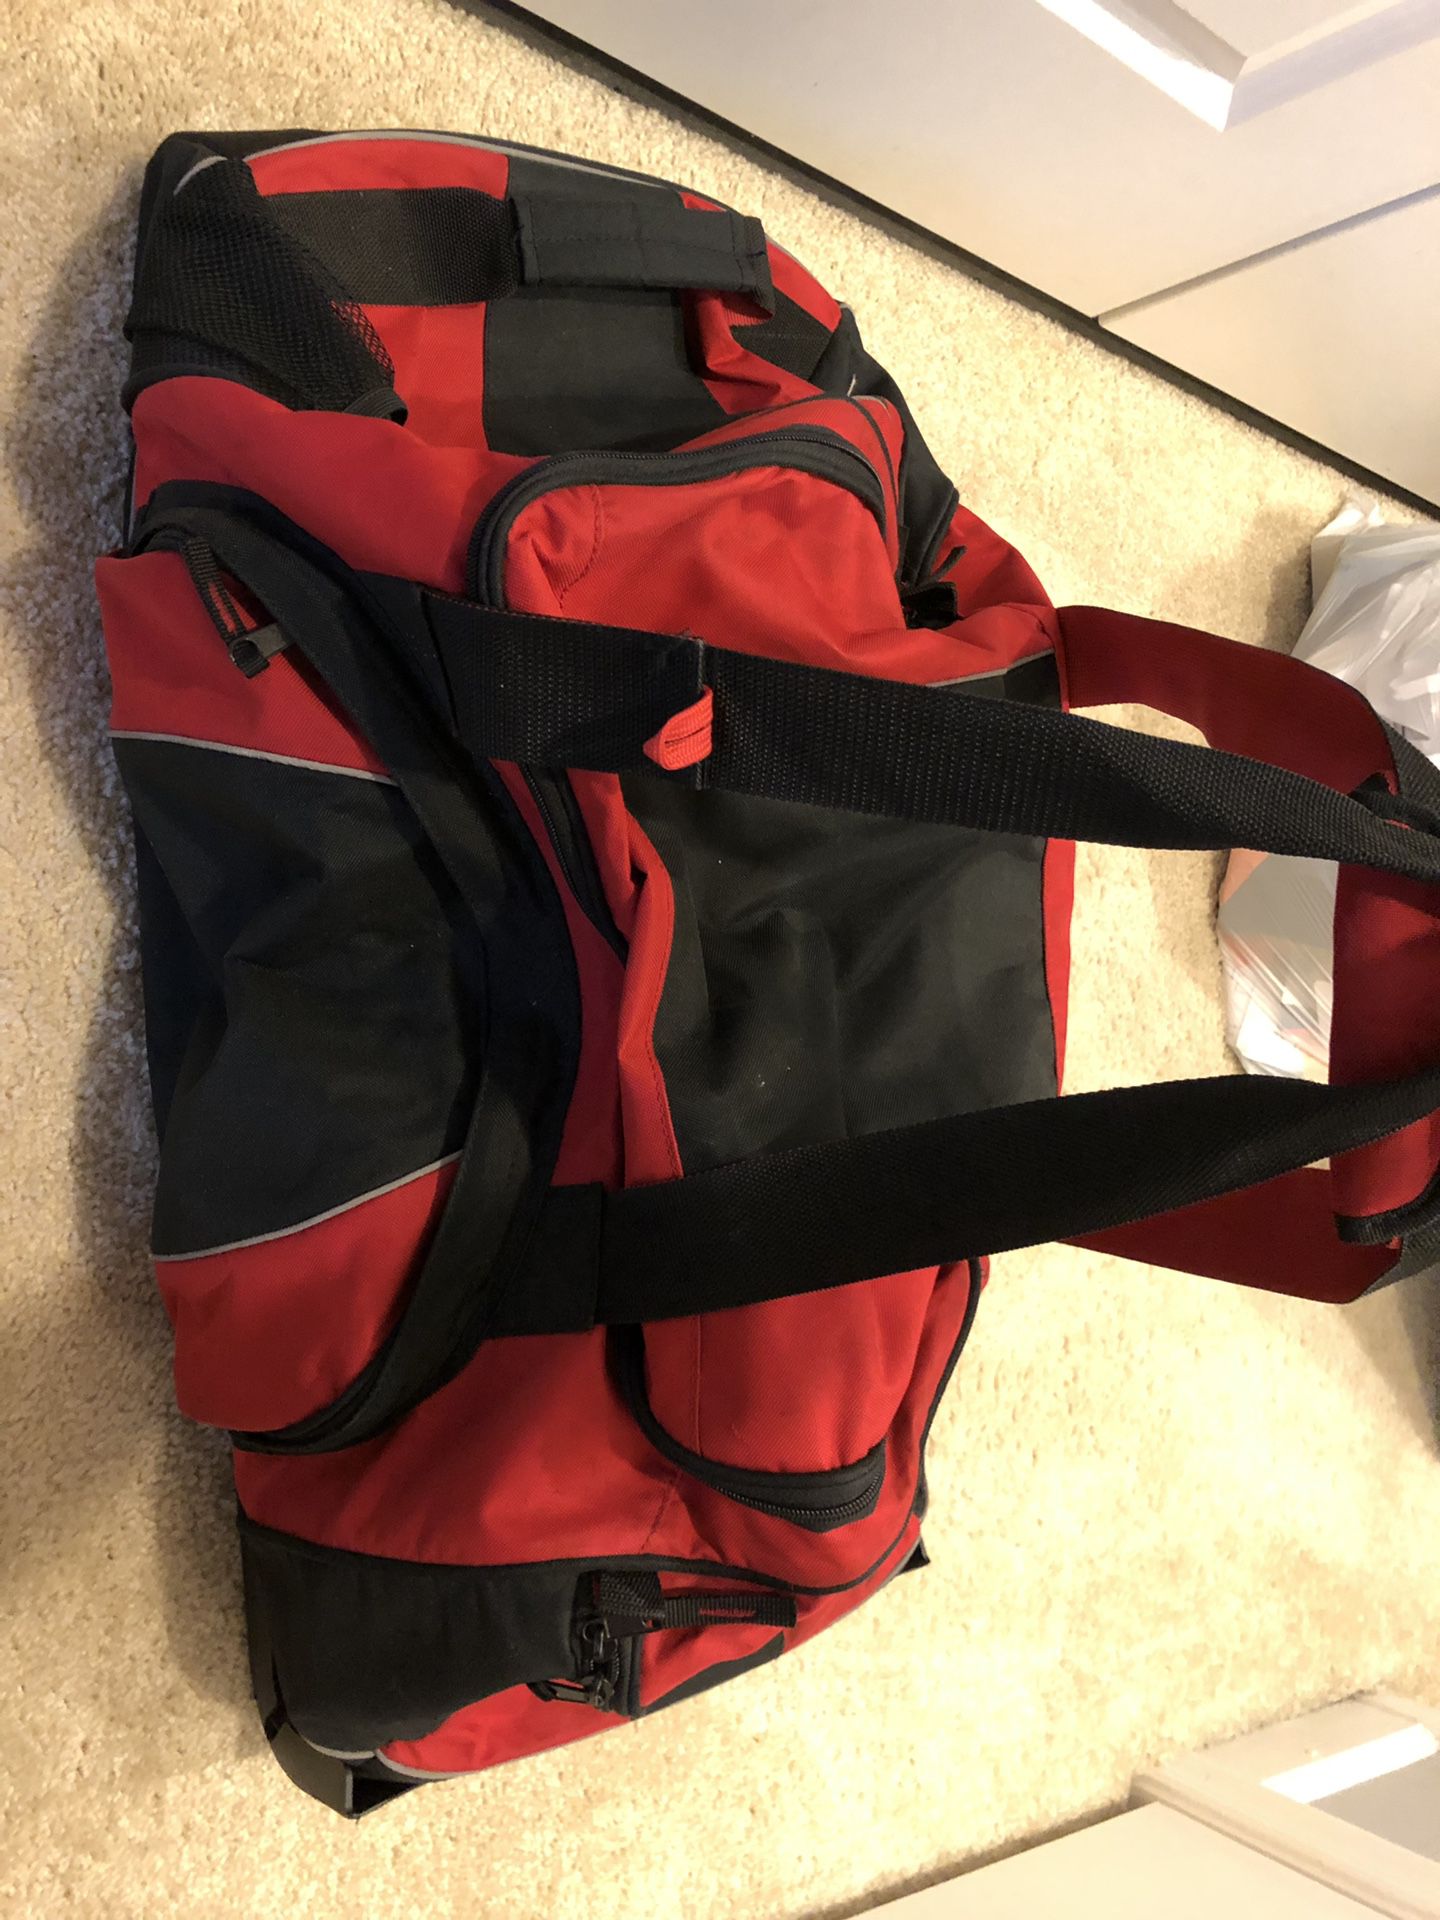 Large Duffle Bag (w/ wheels) - Black and Red